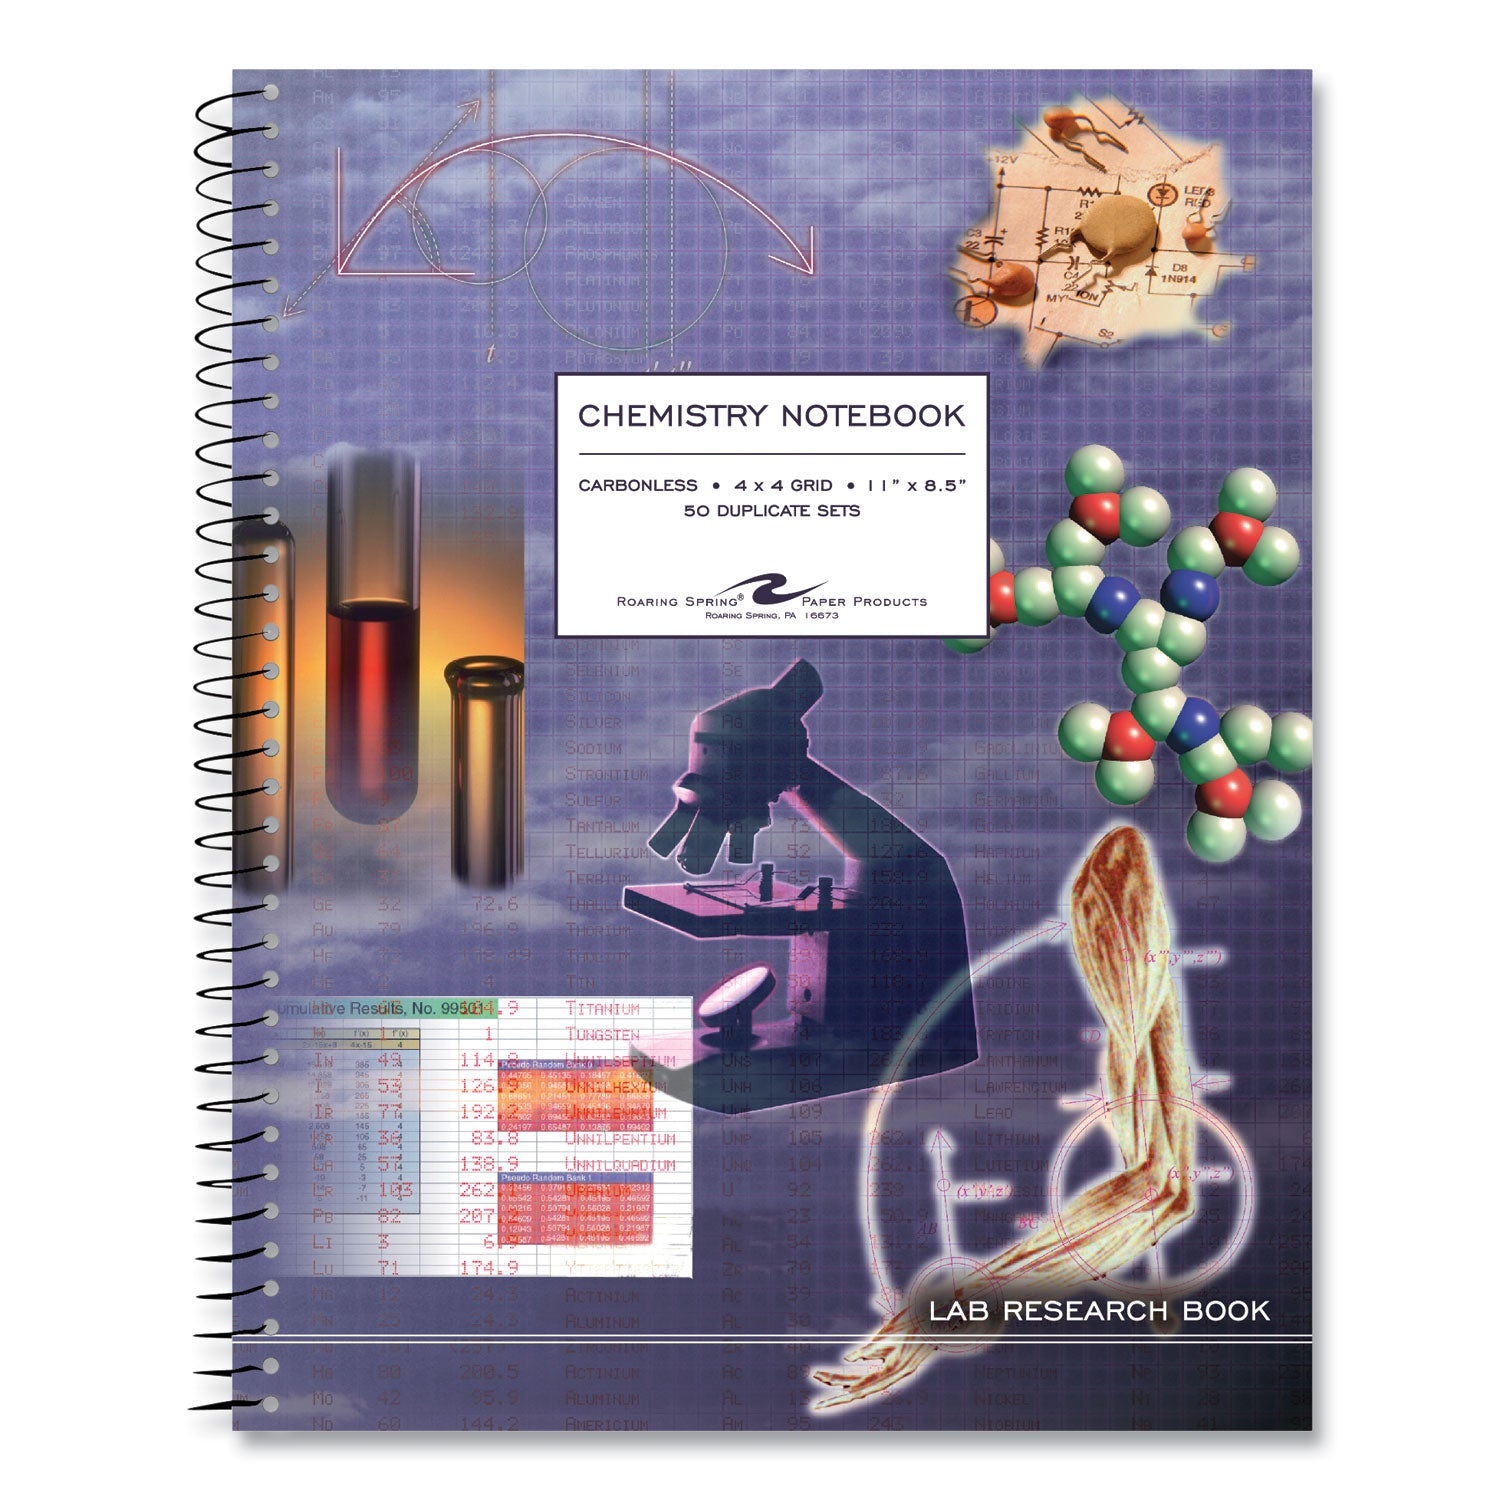 lab-science-carbonless-notebook-quad-rule-4-sq-in-multicolor-cover-100-11x85-sheets-12-ctships-in-4-6-business-days_roa77650cs - 2